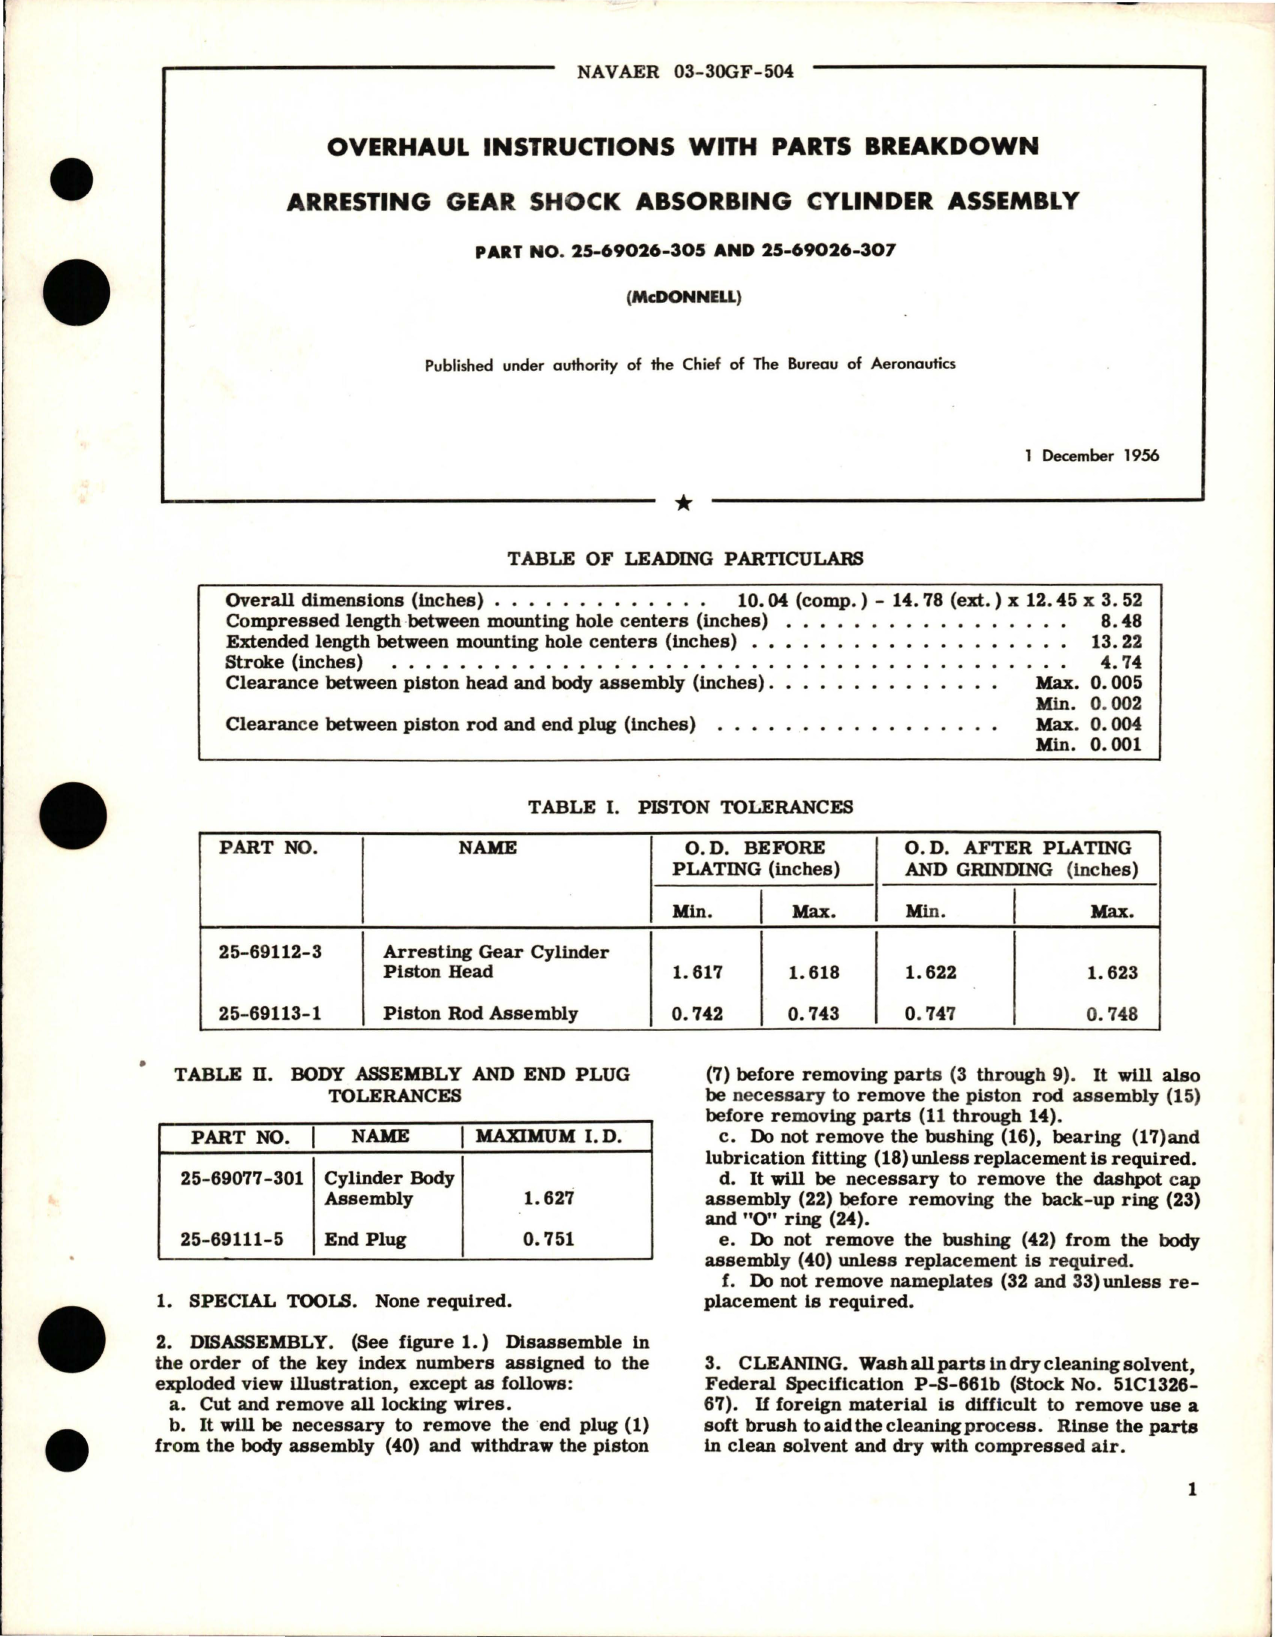 Sample page 1 from AirCorps Library document: Overhaul Instructions with Parts Breakdown for Arresting Gear Shock Absorbing Cylinder Assembly - Part 25-69026-305 and 25-69026-307